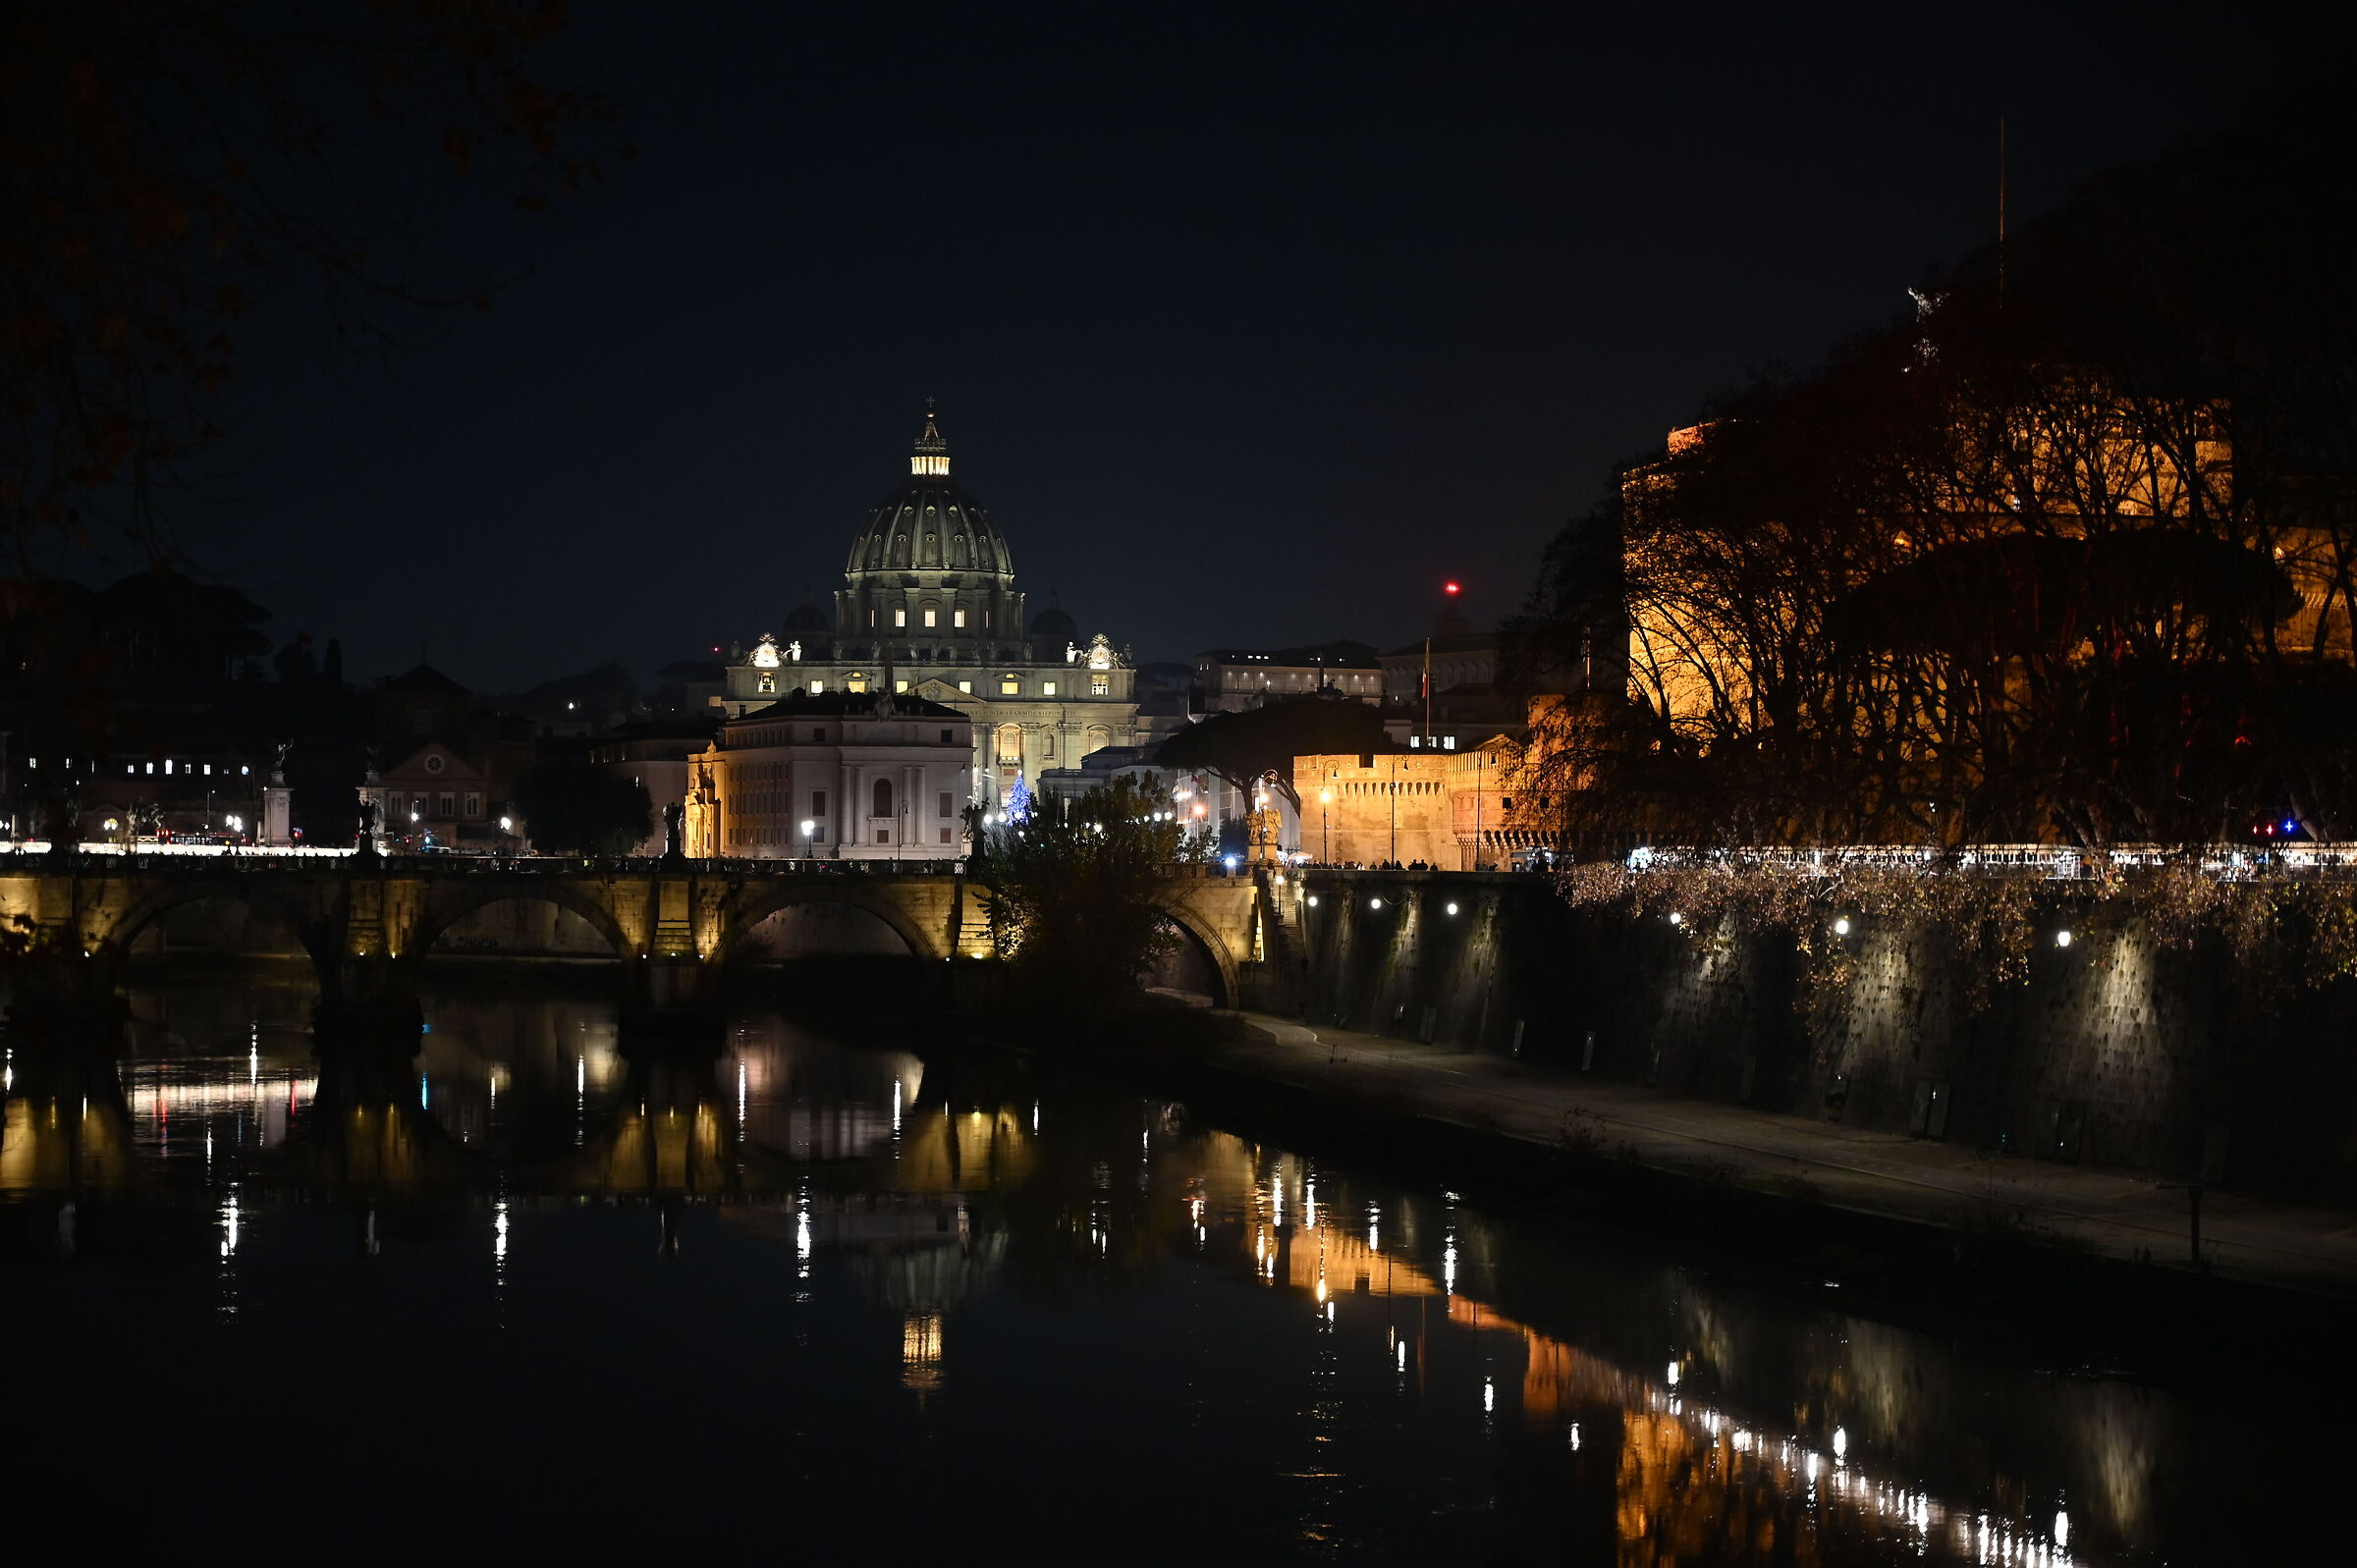 Rome by night...